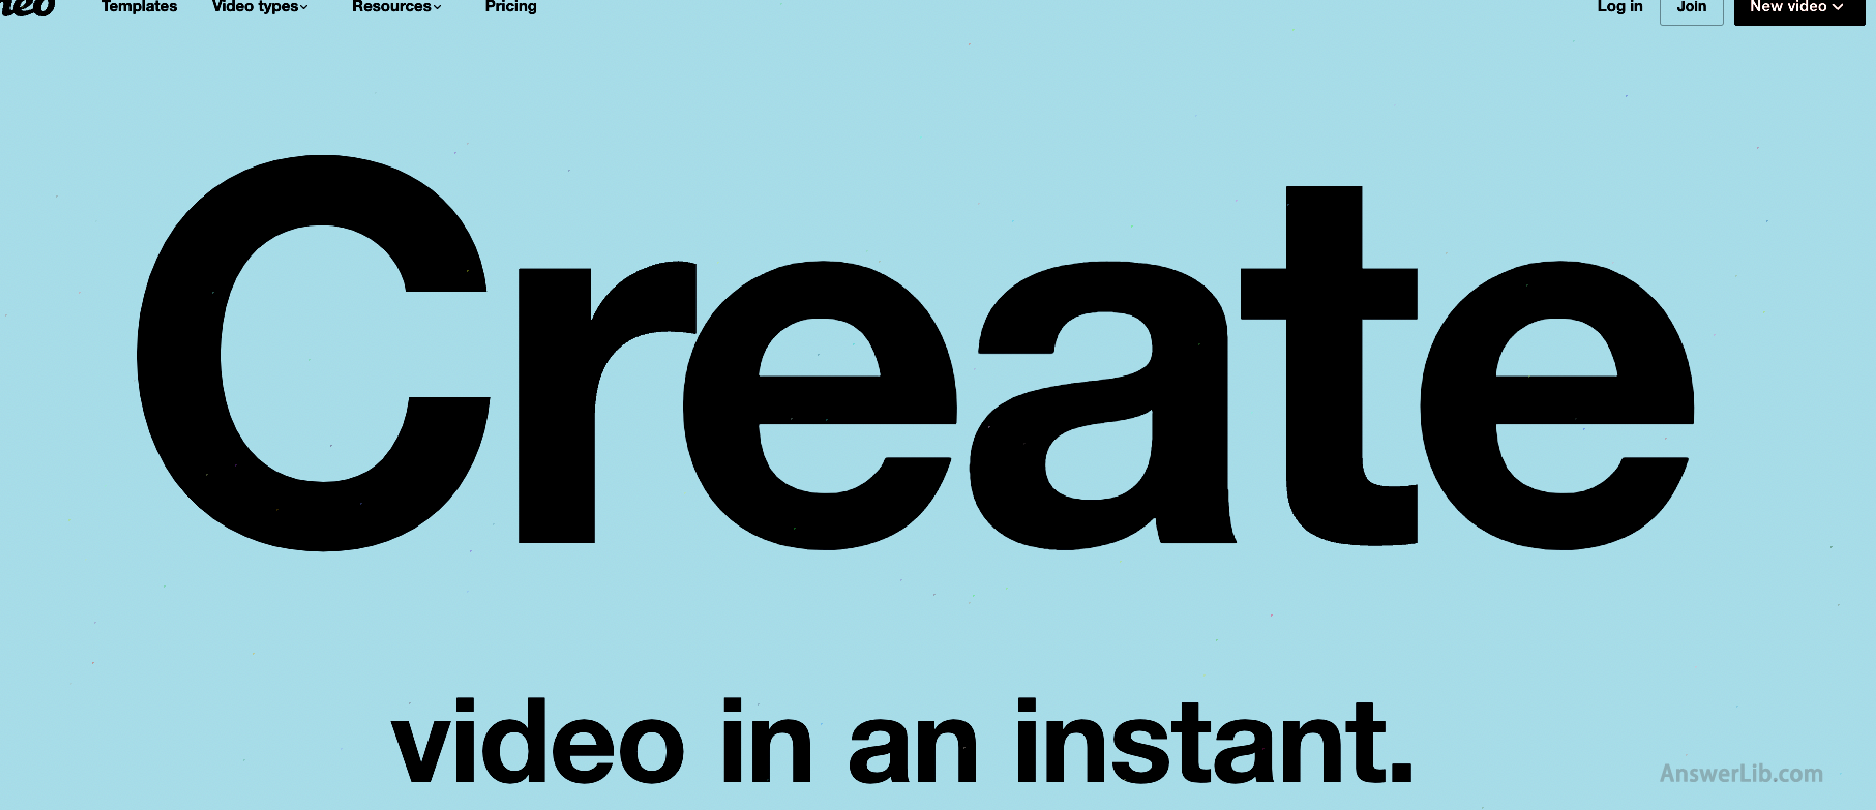 Best small enterprise applicable video editing software: Vimeo